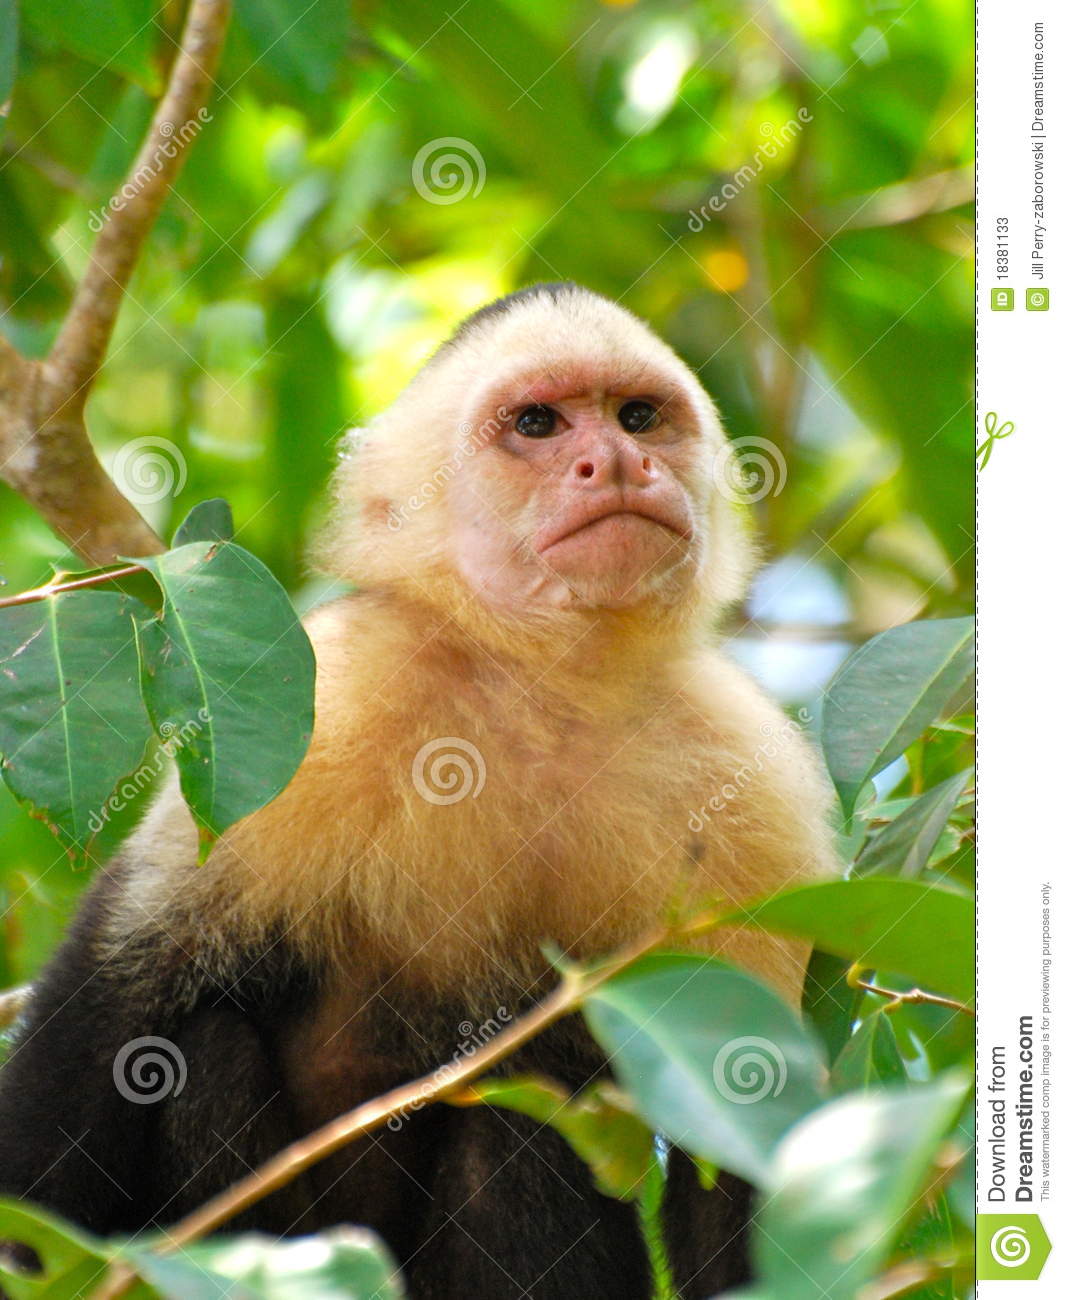 White Face Monkey In The Rainforest Stock Photos   Image  18381133